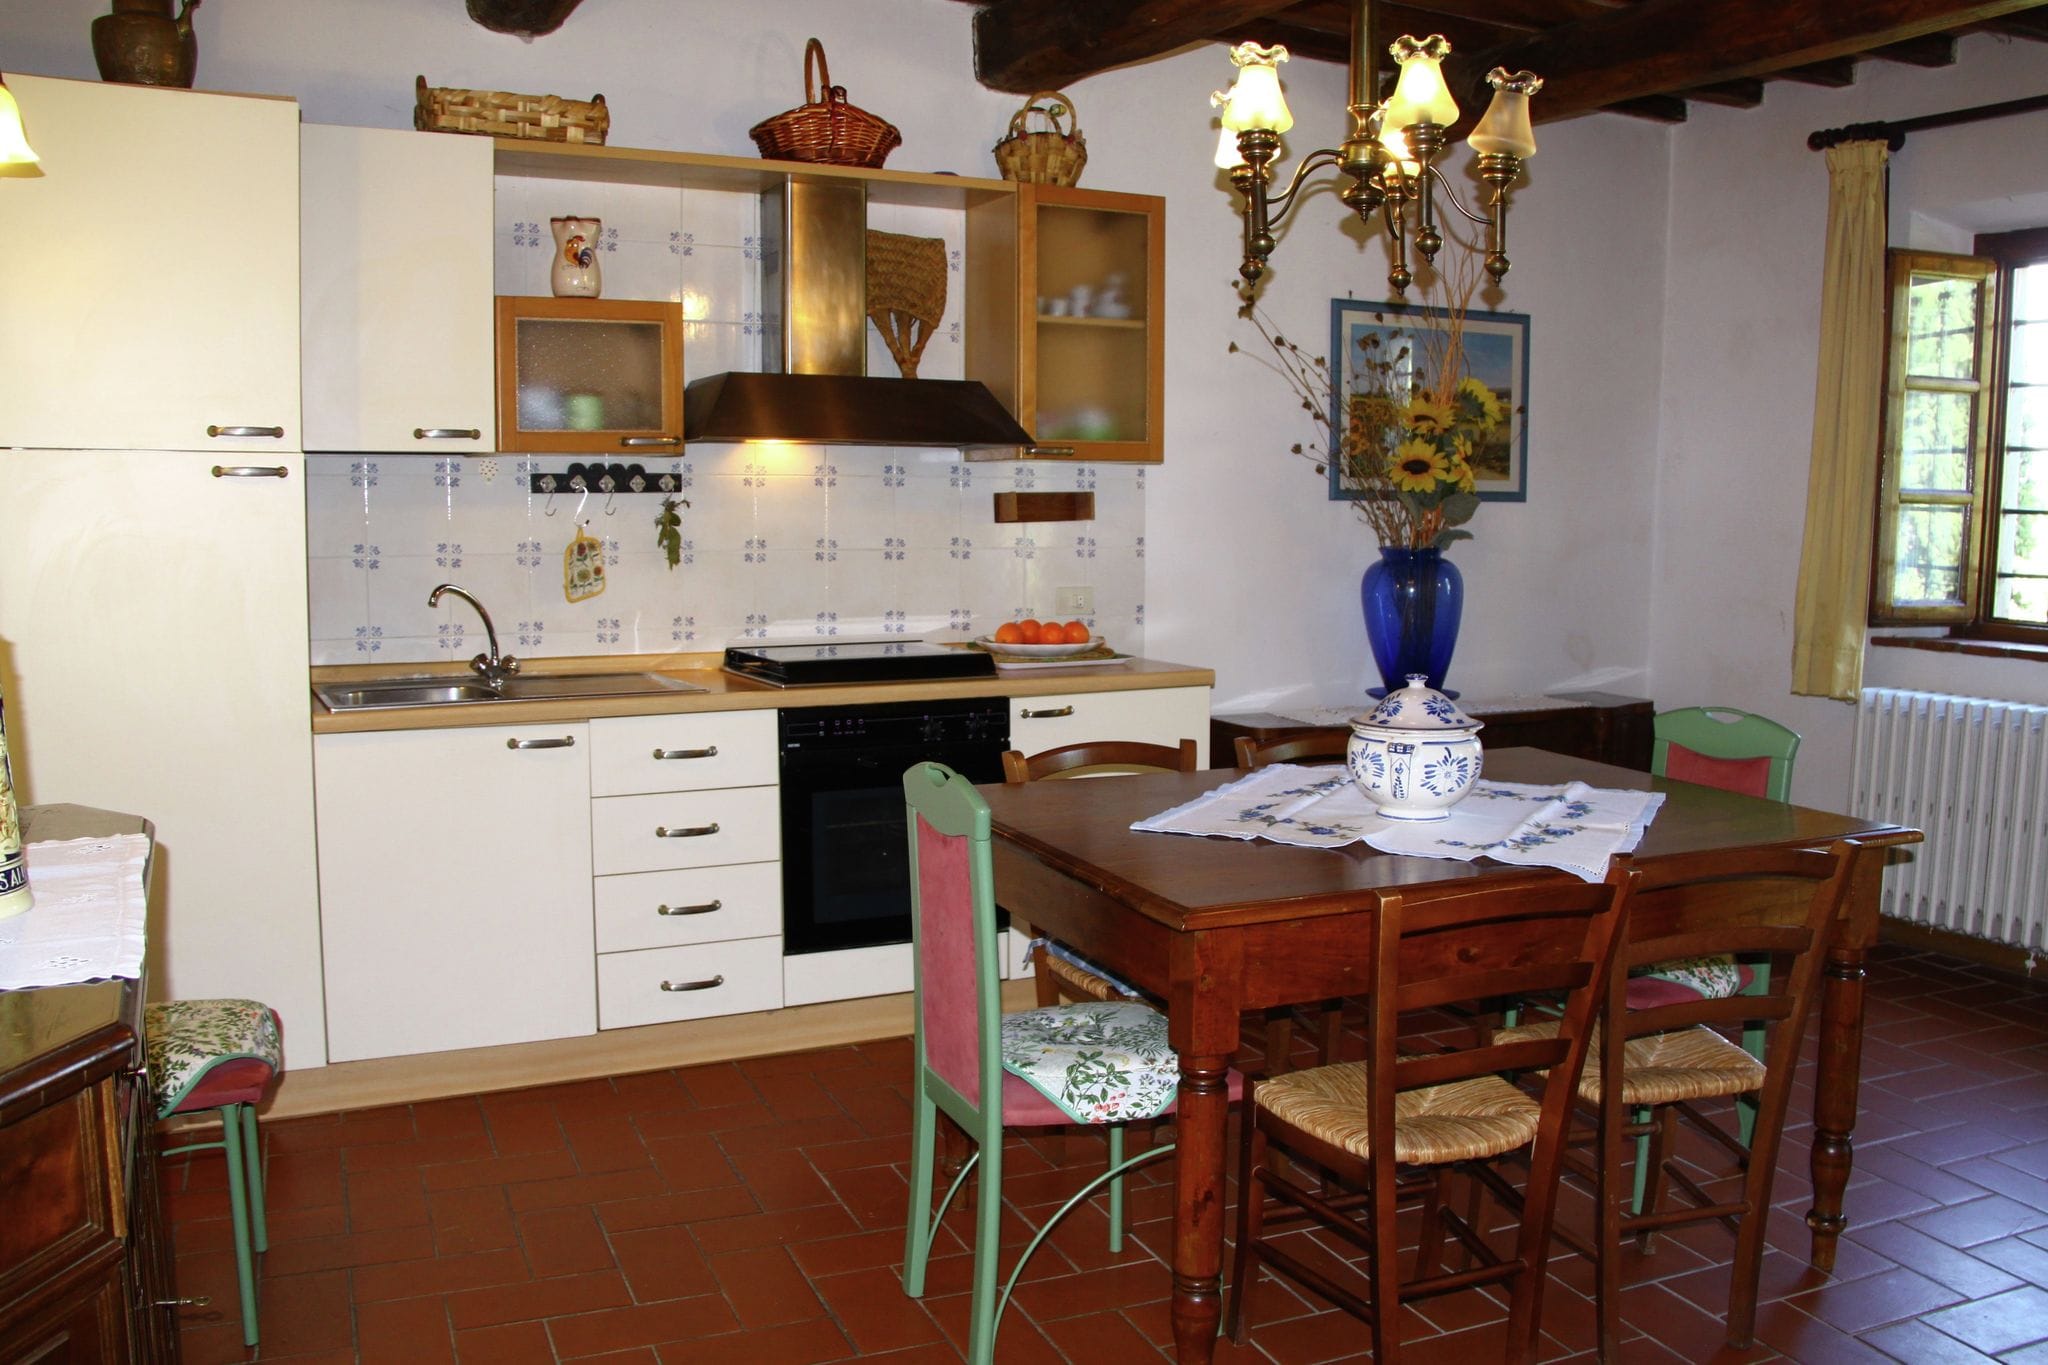 Holiday Home in Vinci with Swimming Pool, Garden, BBQ, Heating